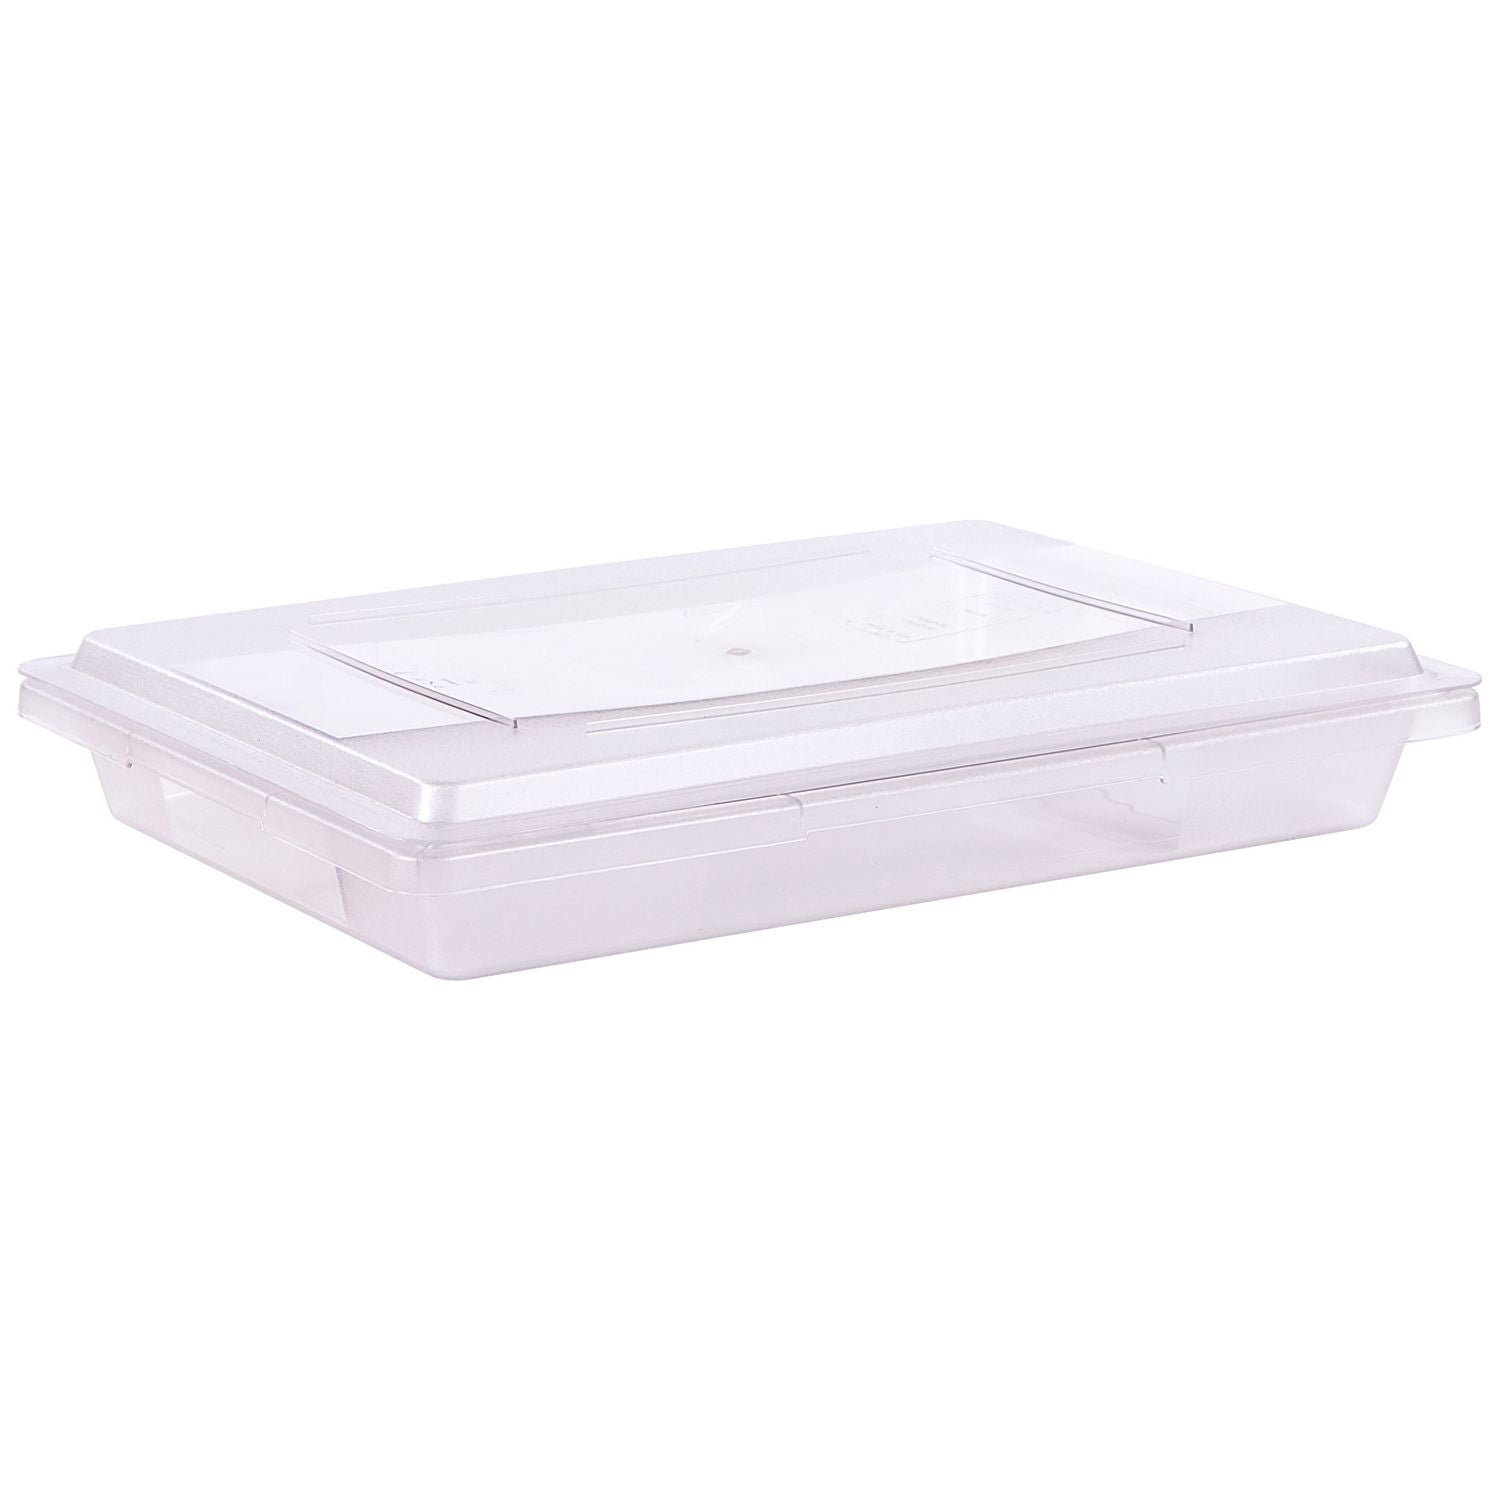 storplus-polycarbonate-food-storage-container-5-gal-18-x-26-x-35-clear-plastic_cfs1062007 - 4